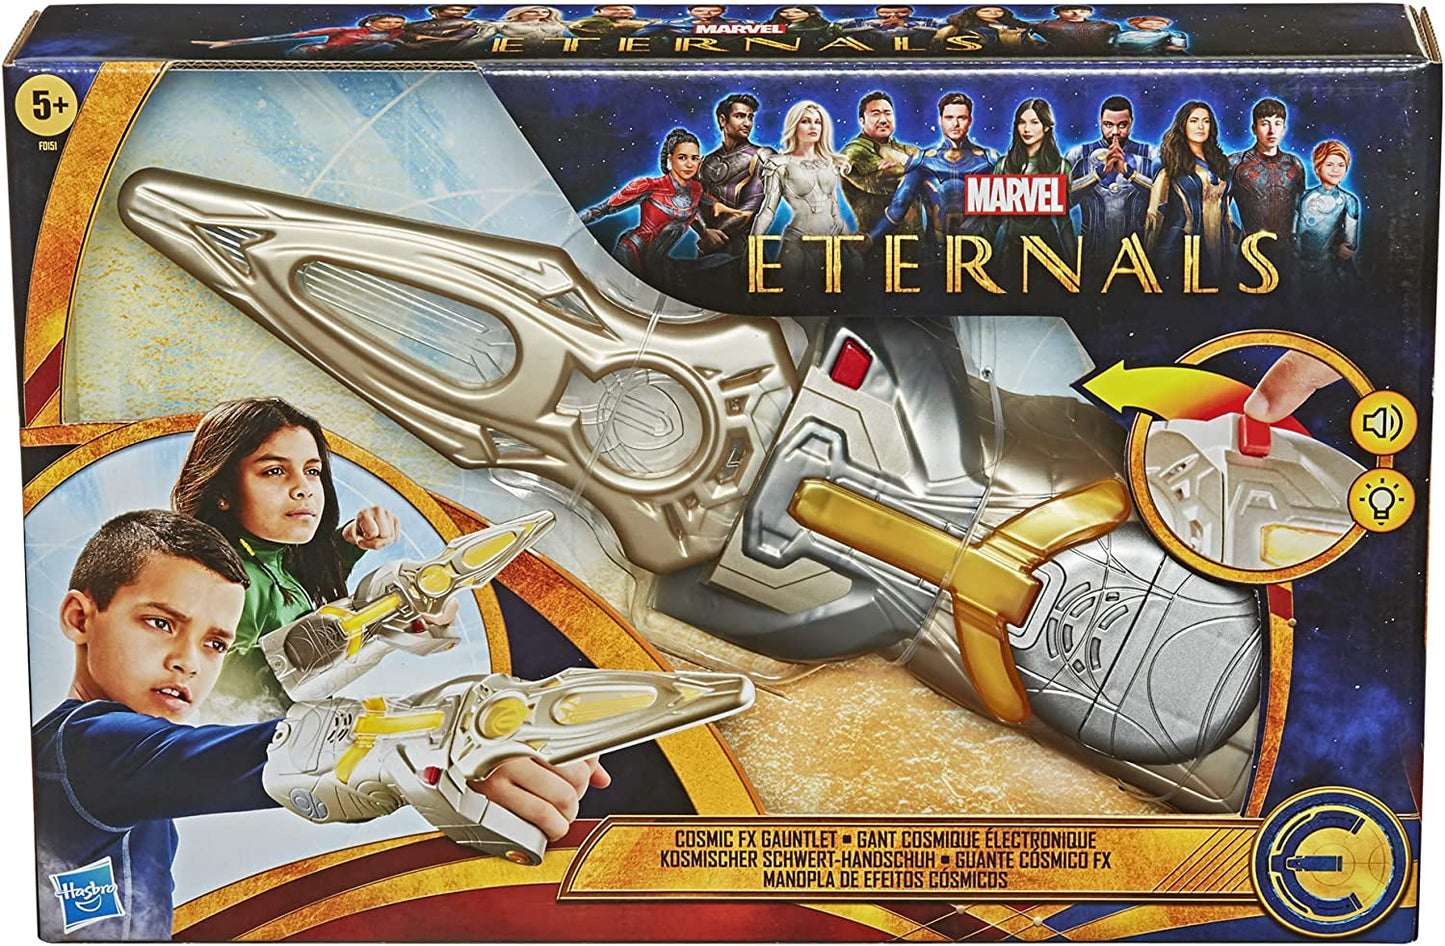 Marvel Hasbro The Eternals Cosmic FX Gauntlet Role Play Toy, Lights and Sounds, Inspired by The Eternals Movie, for Kids Ages 5 and Up